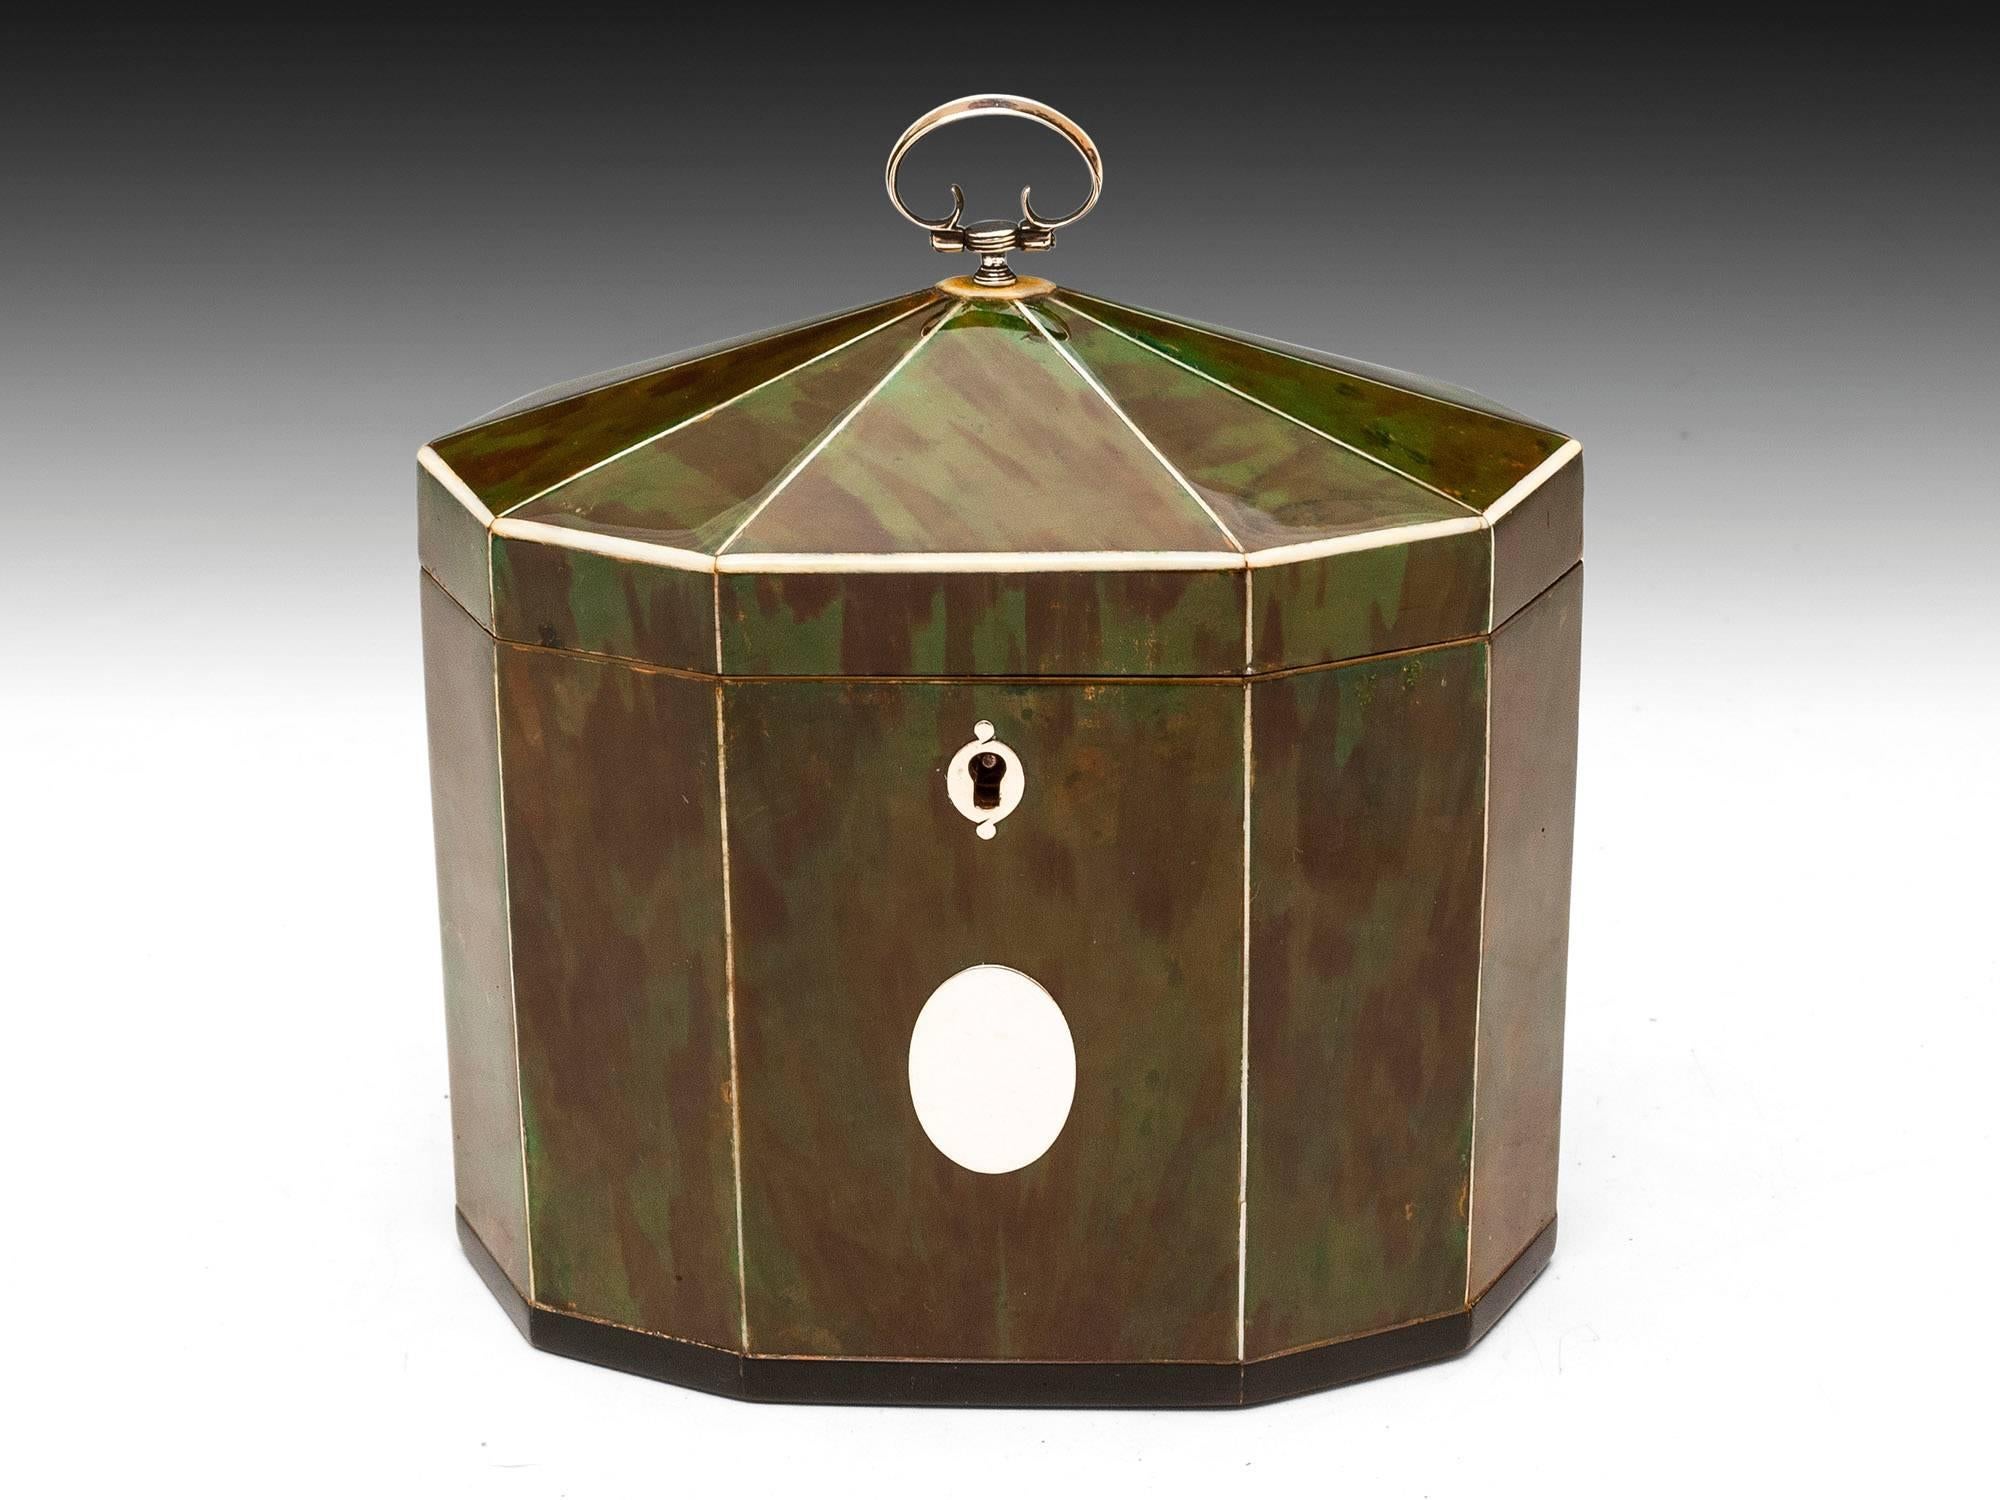 Rare decagonal tent top tea caddy with a deep green hue, separated by contrasting stringing. Horn lipped base, vacant silver initial plate, escutcheon, hinge and pull handle. The interior comprises two compartments with bone-handled green